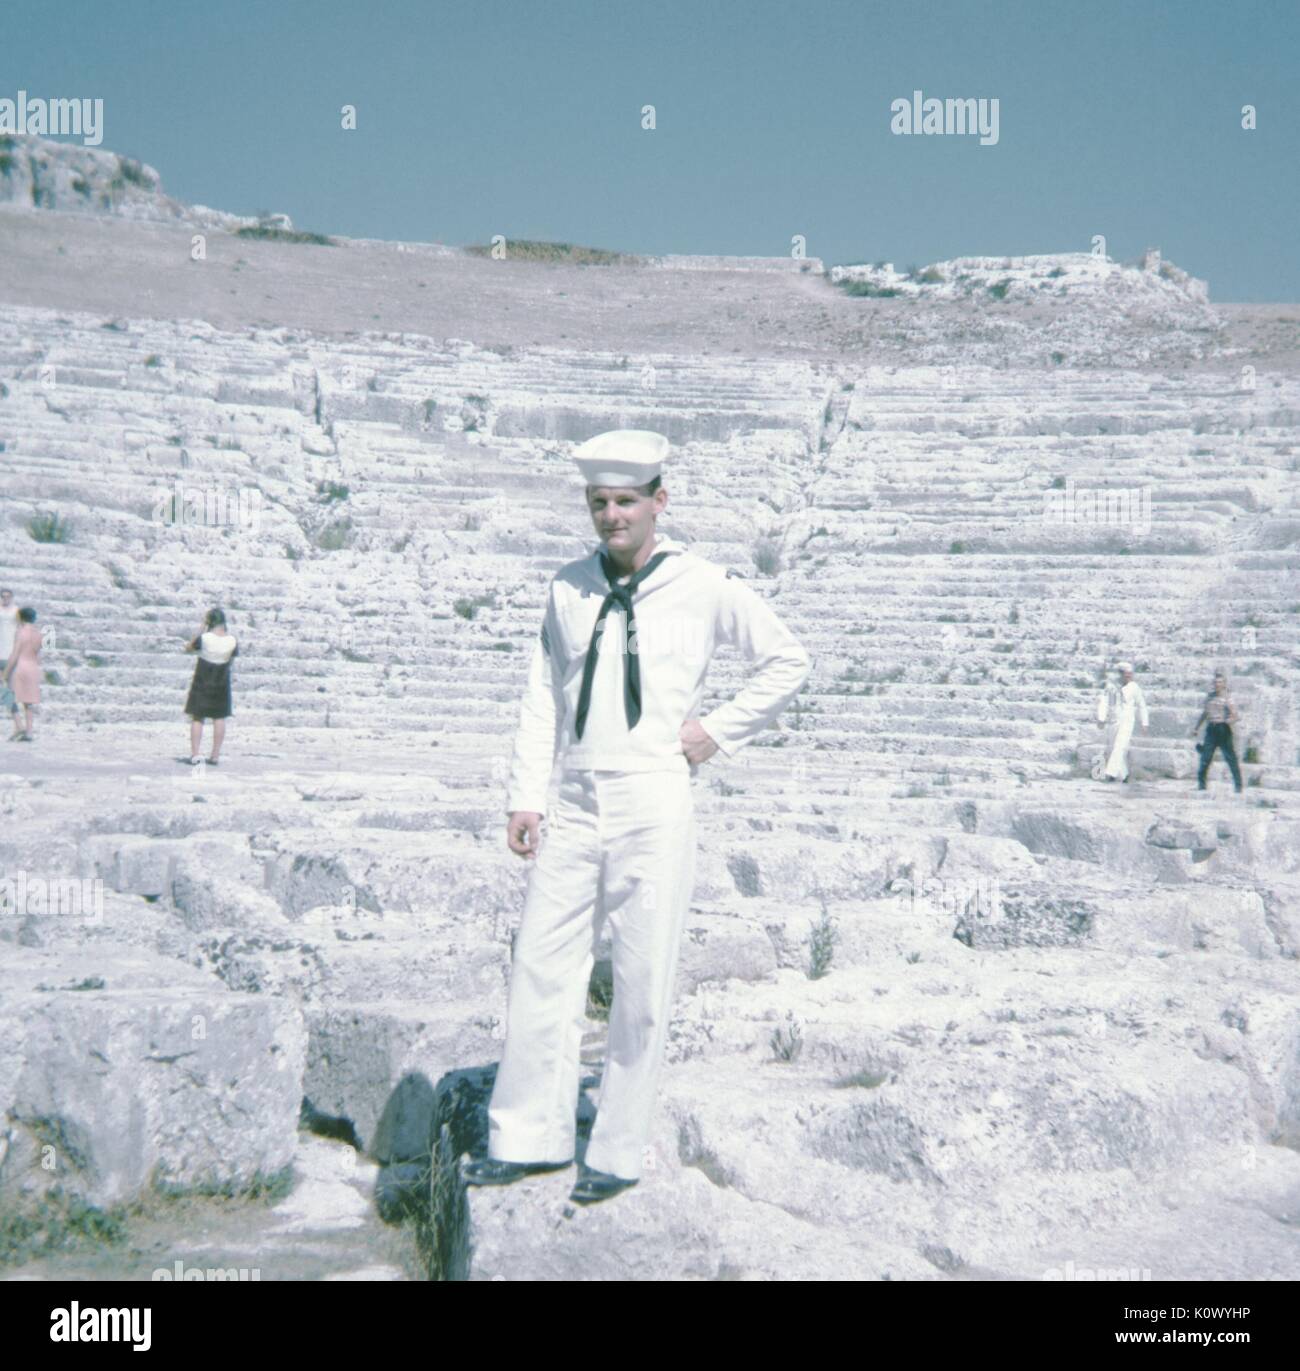 Sailor in United States Navy uniform, standing with his hands on his hips in front of the ruins of a Roman amphitheatre, other tourists in the background using cameras to take photographs, Athens, Greece, 1967. Photo credit Smith Collection/Gado/Getty Images. Stock Photo